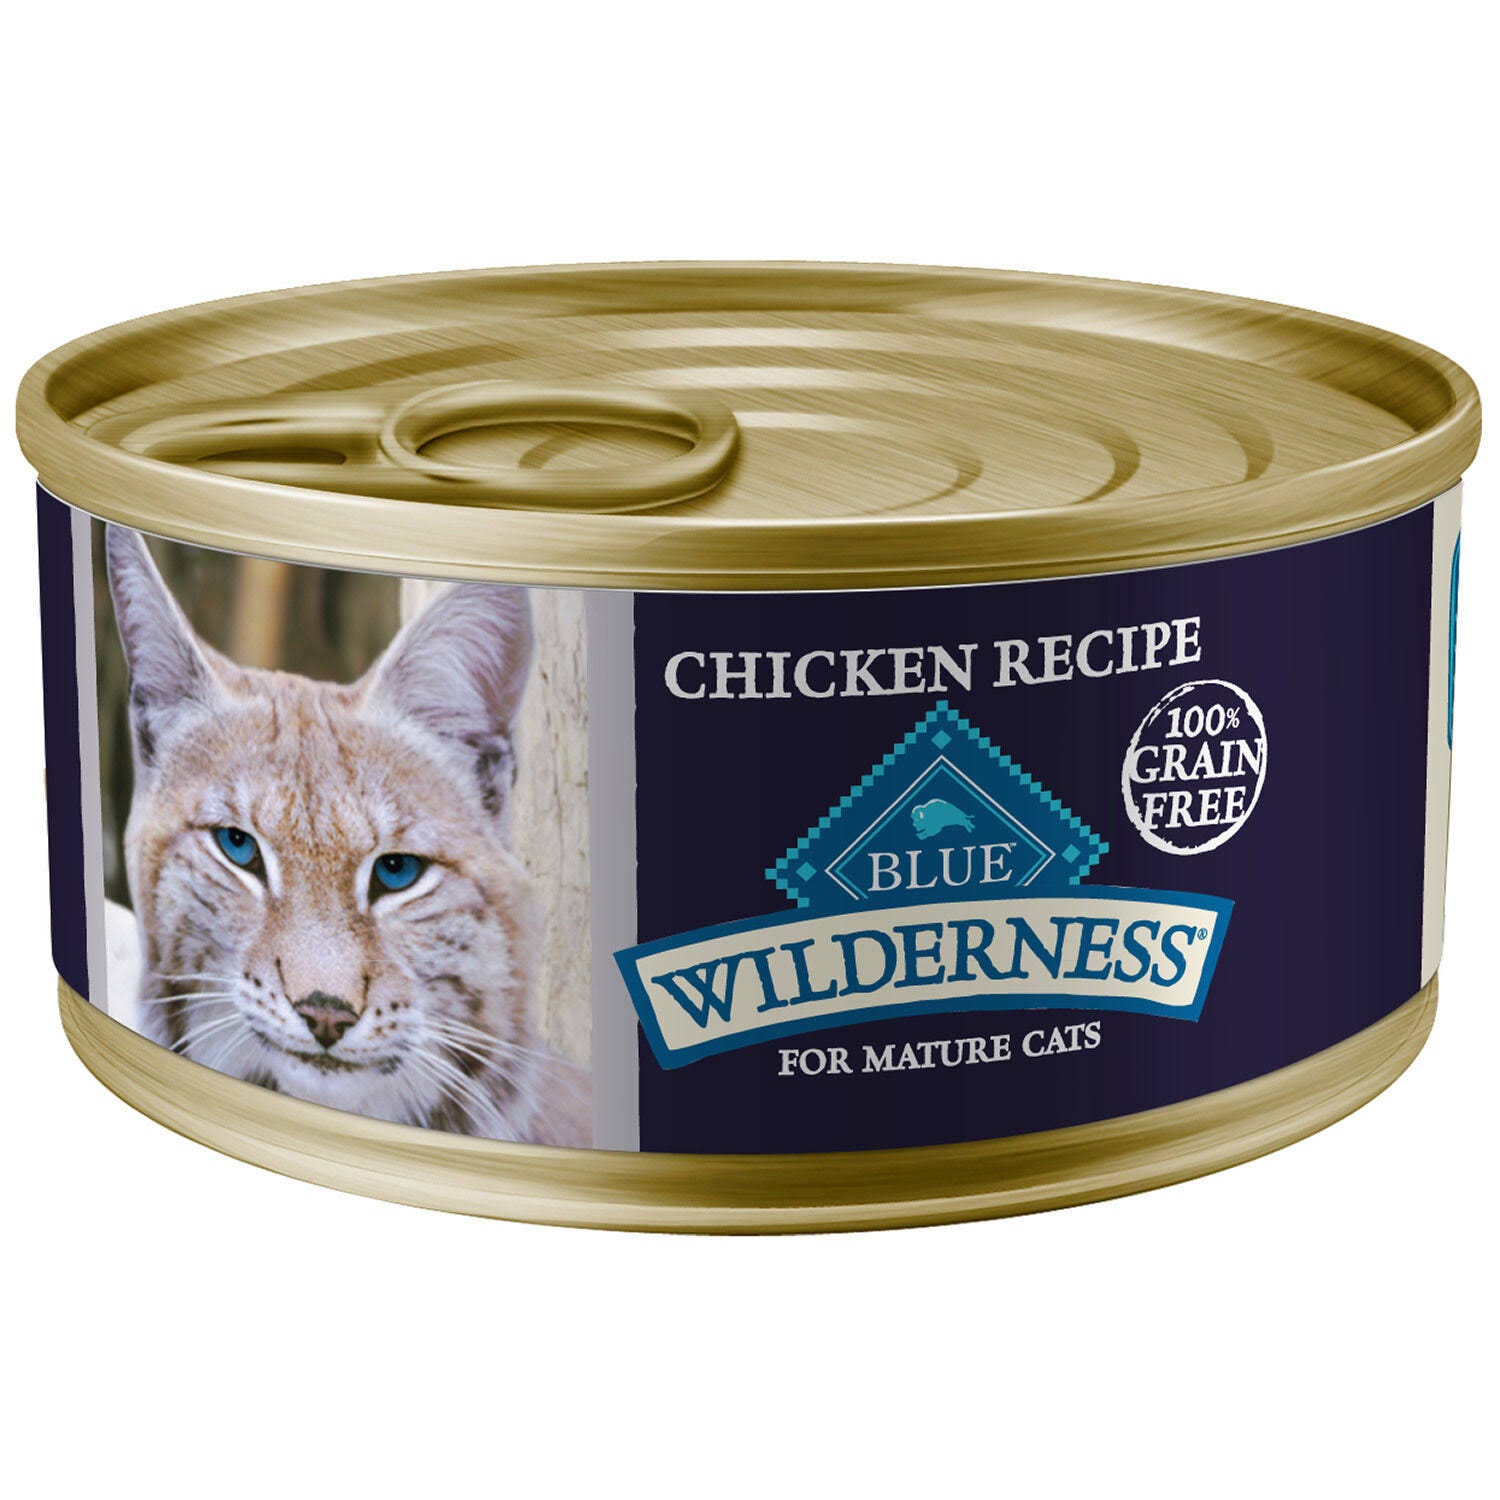 Premium grain-free canned cat food for mature cats | Image